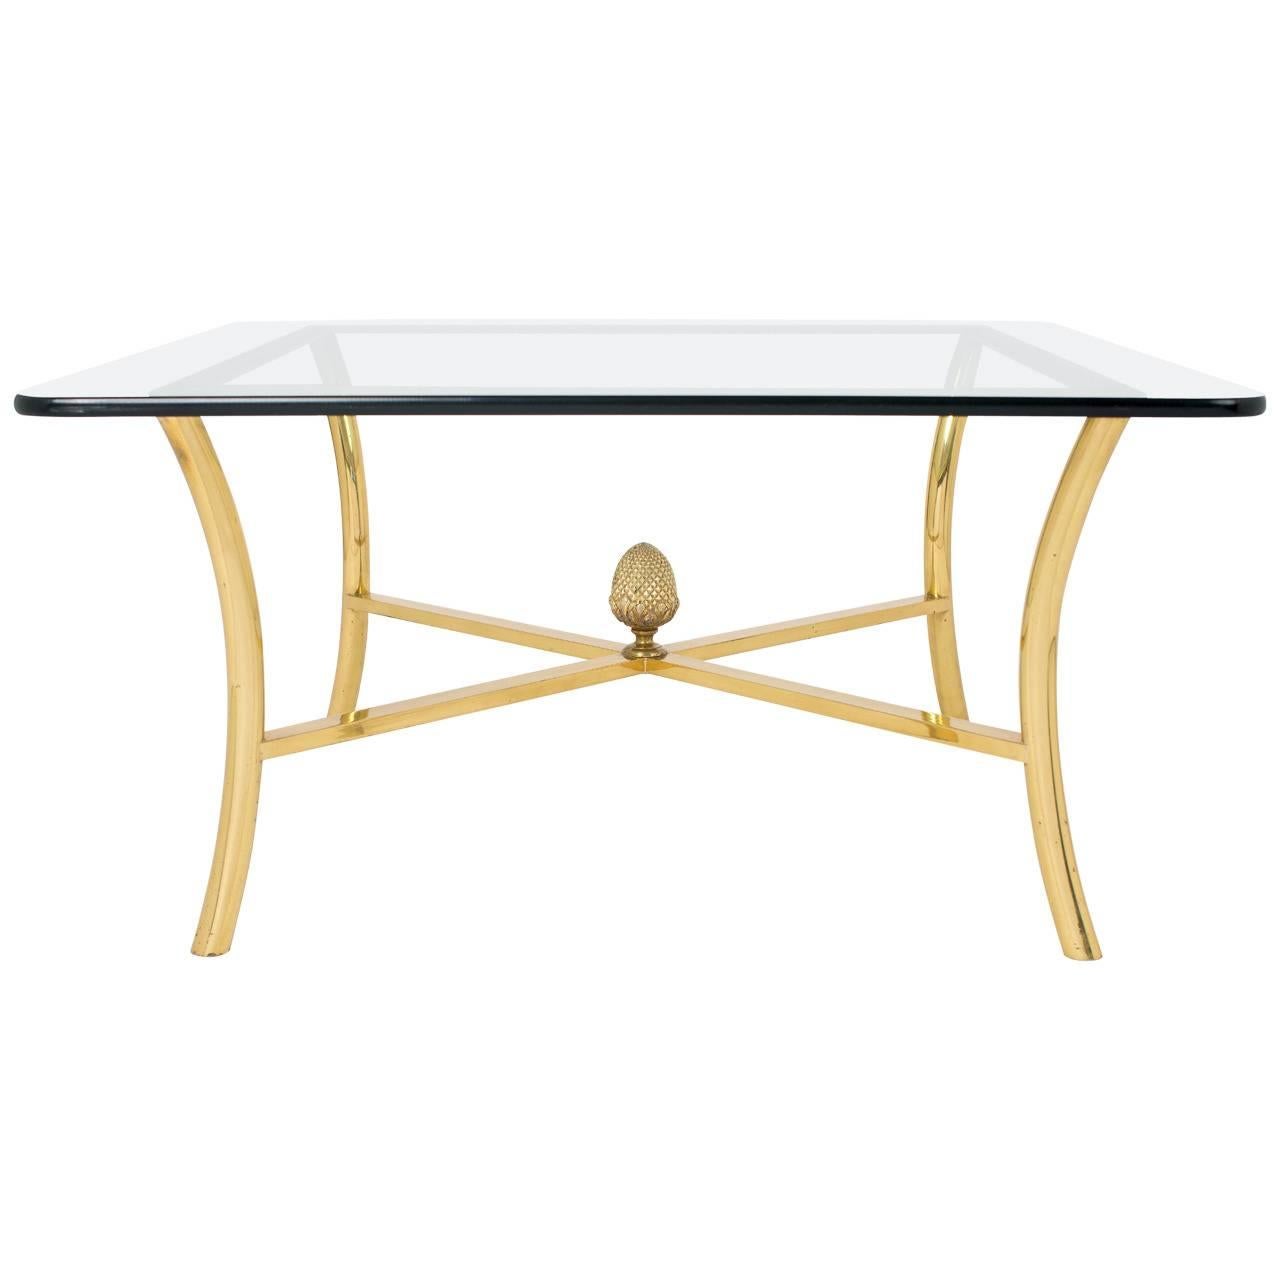 French Vintage Gilt Brass Coffee Table by Maison Raphael